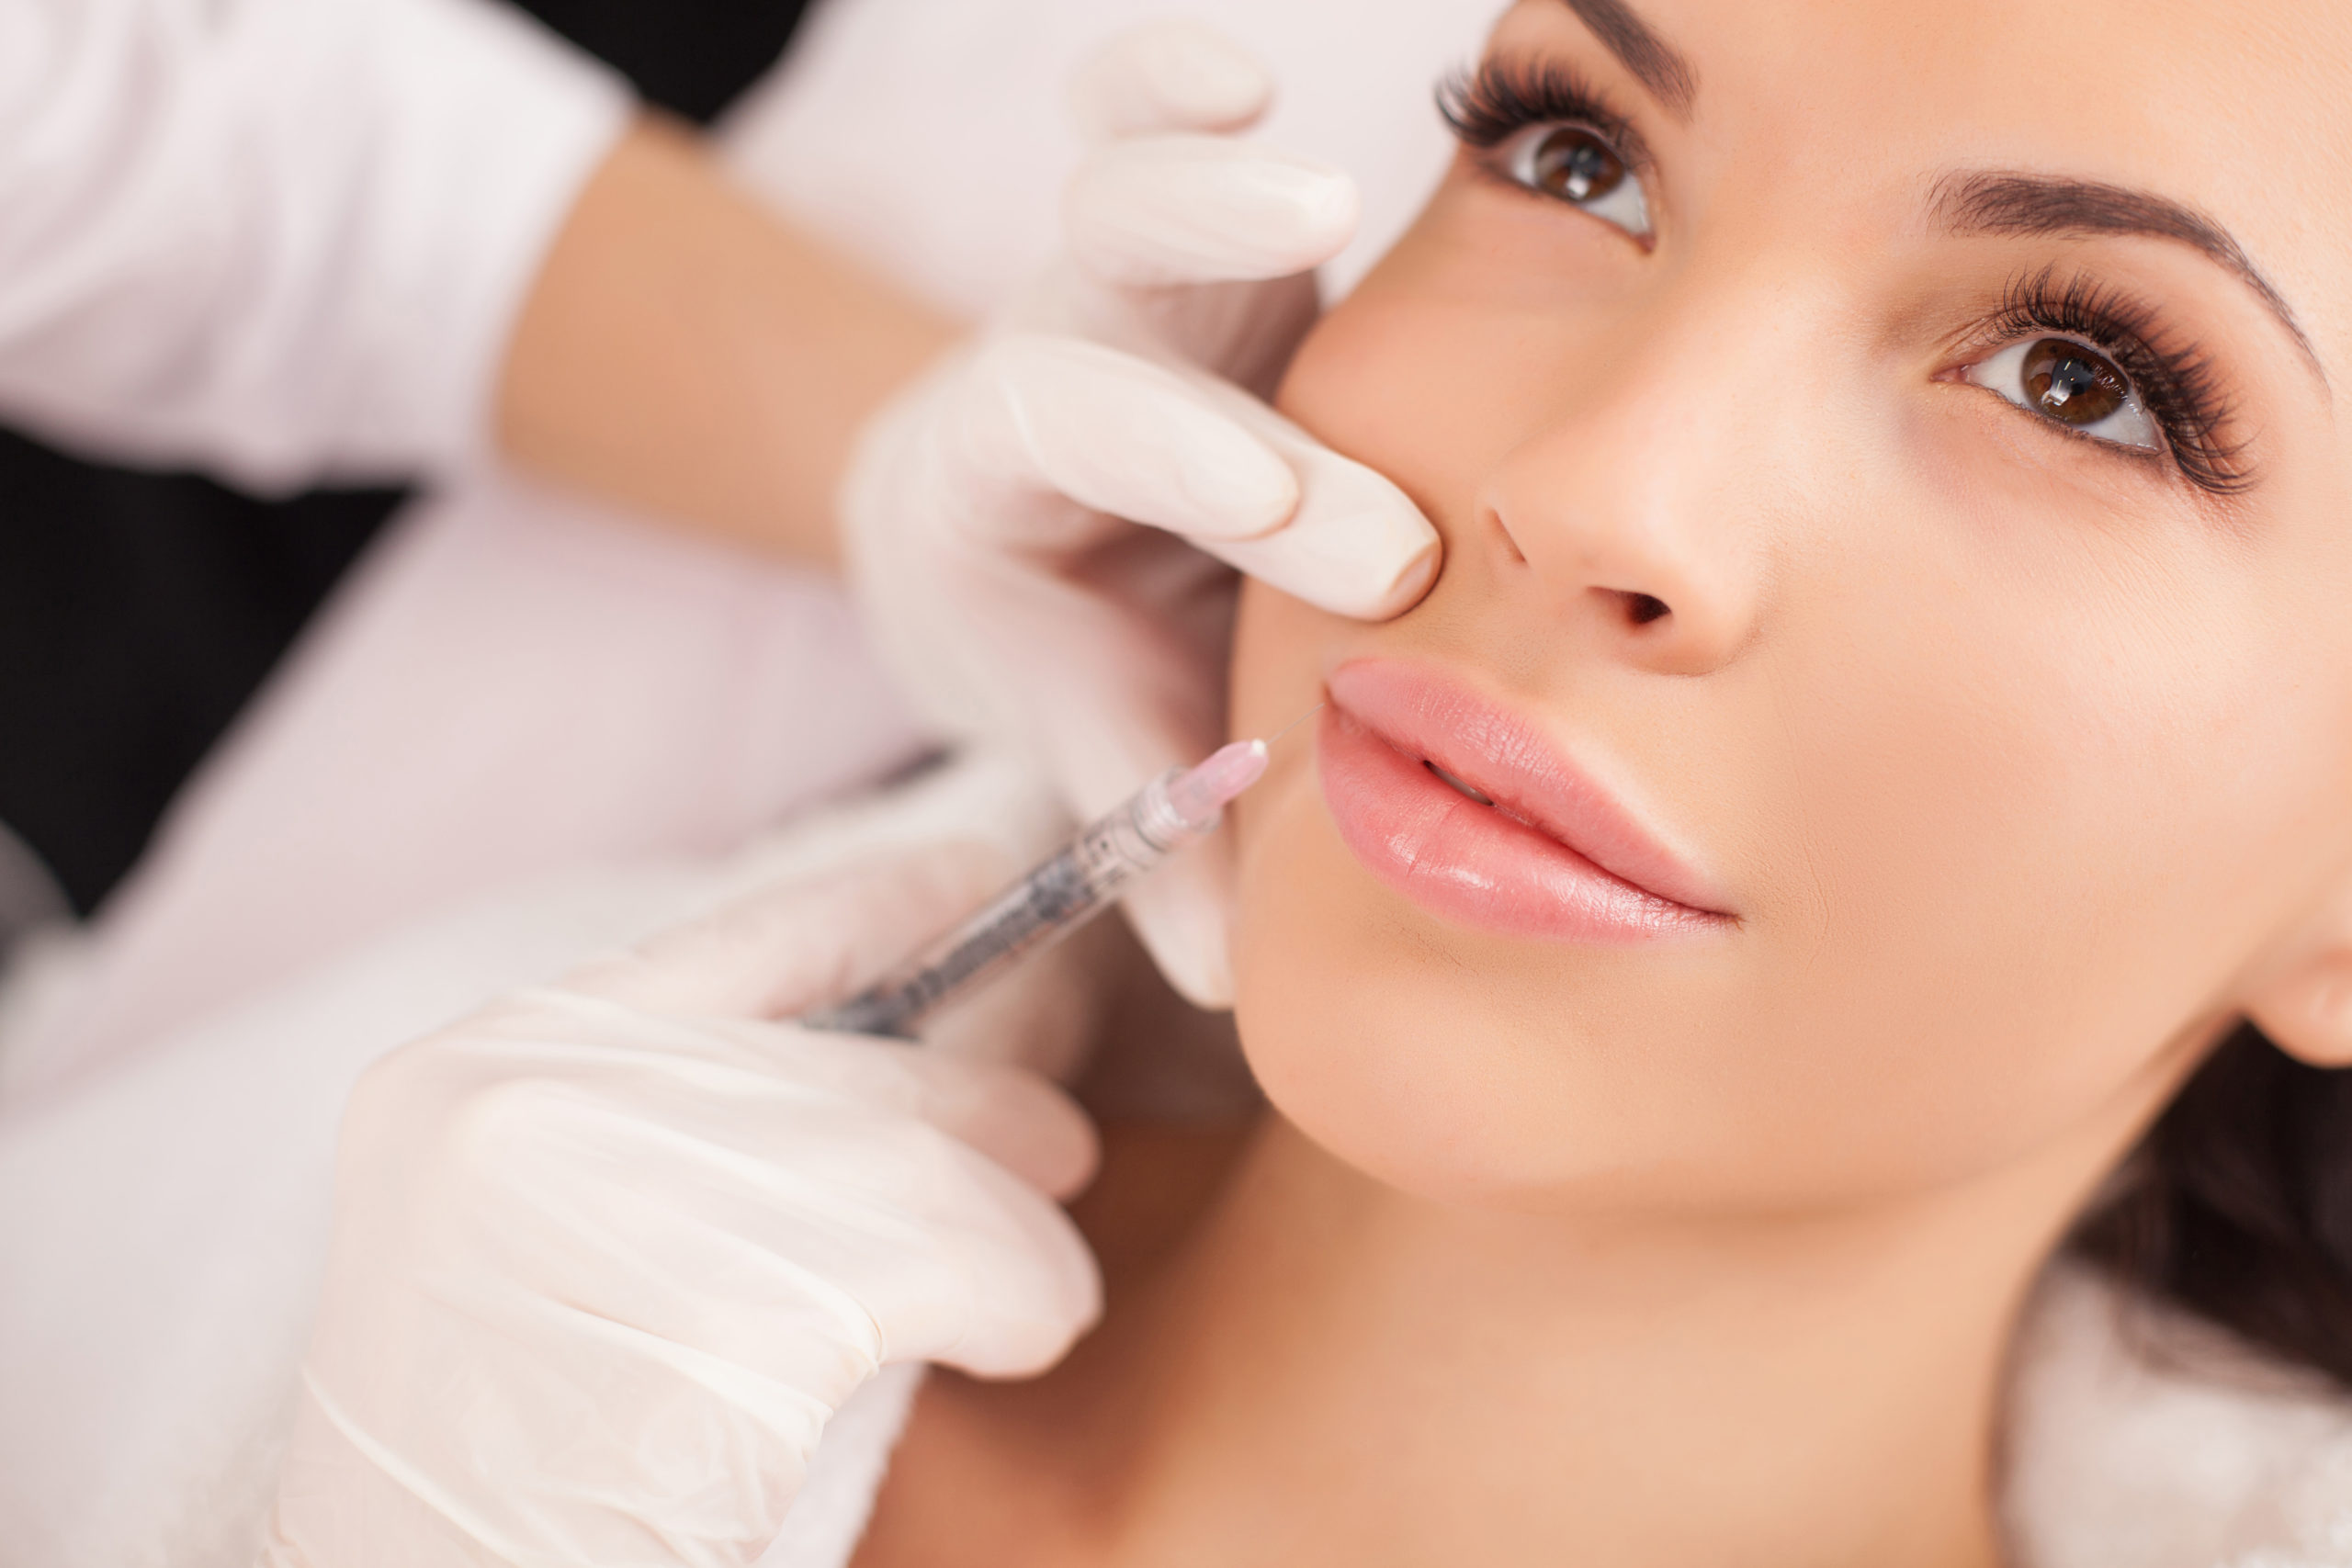 A Woman getting injection near Lips | Get Dermal Fillers in SOSA Medical Aesthetics at Tampa, FL